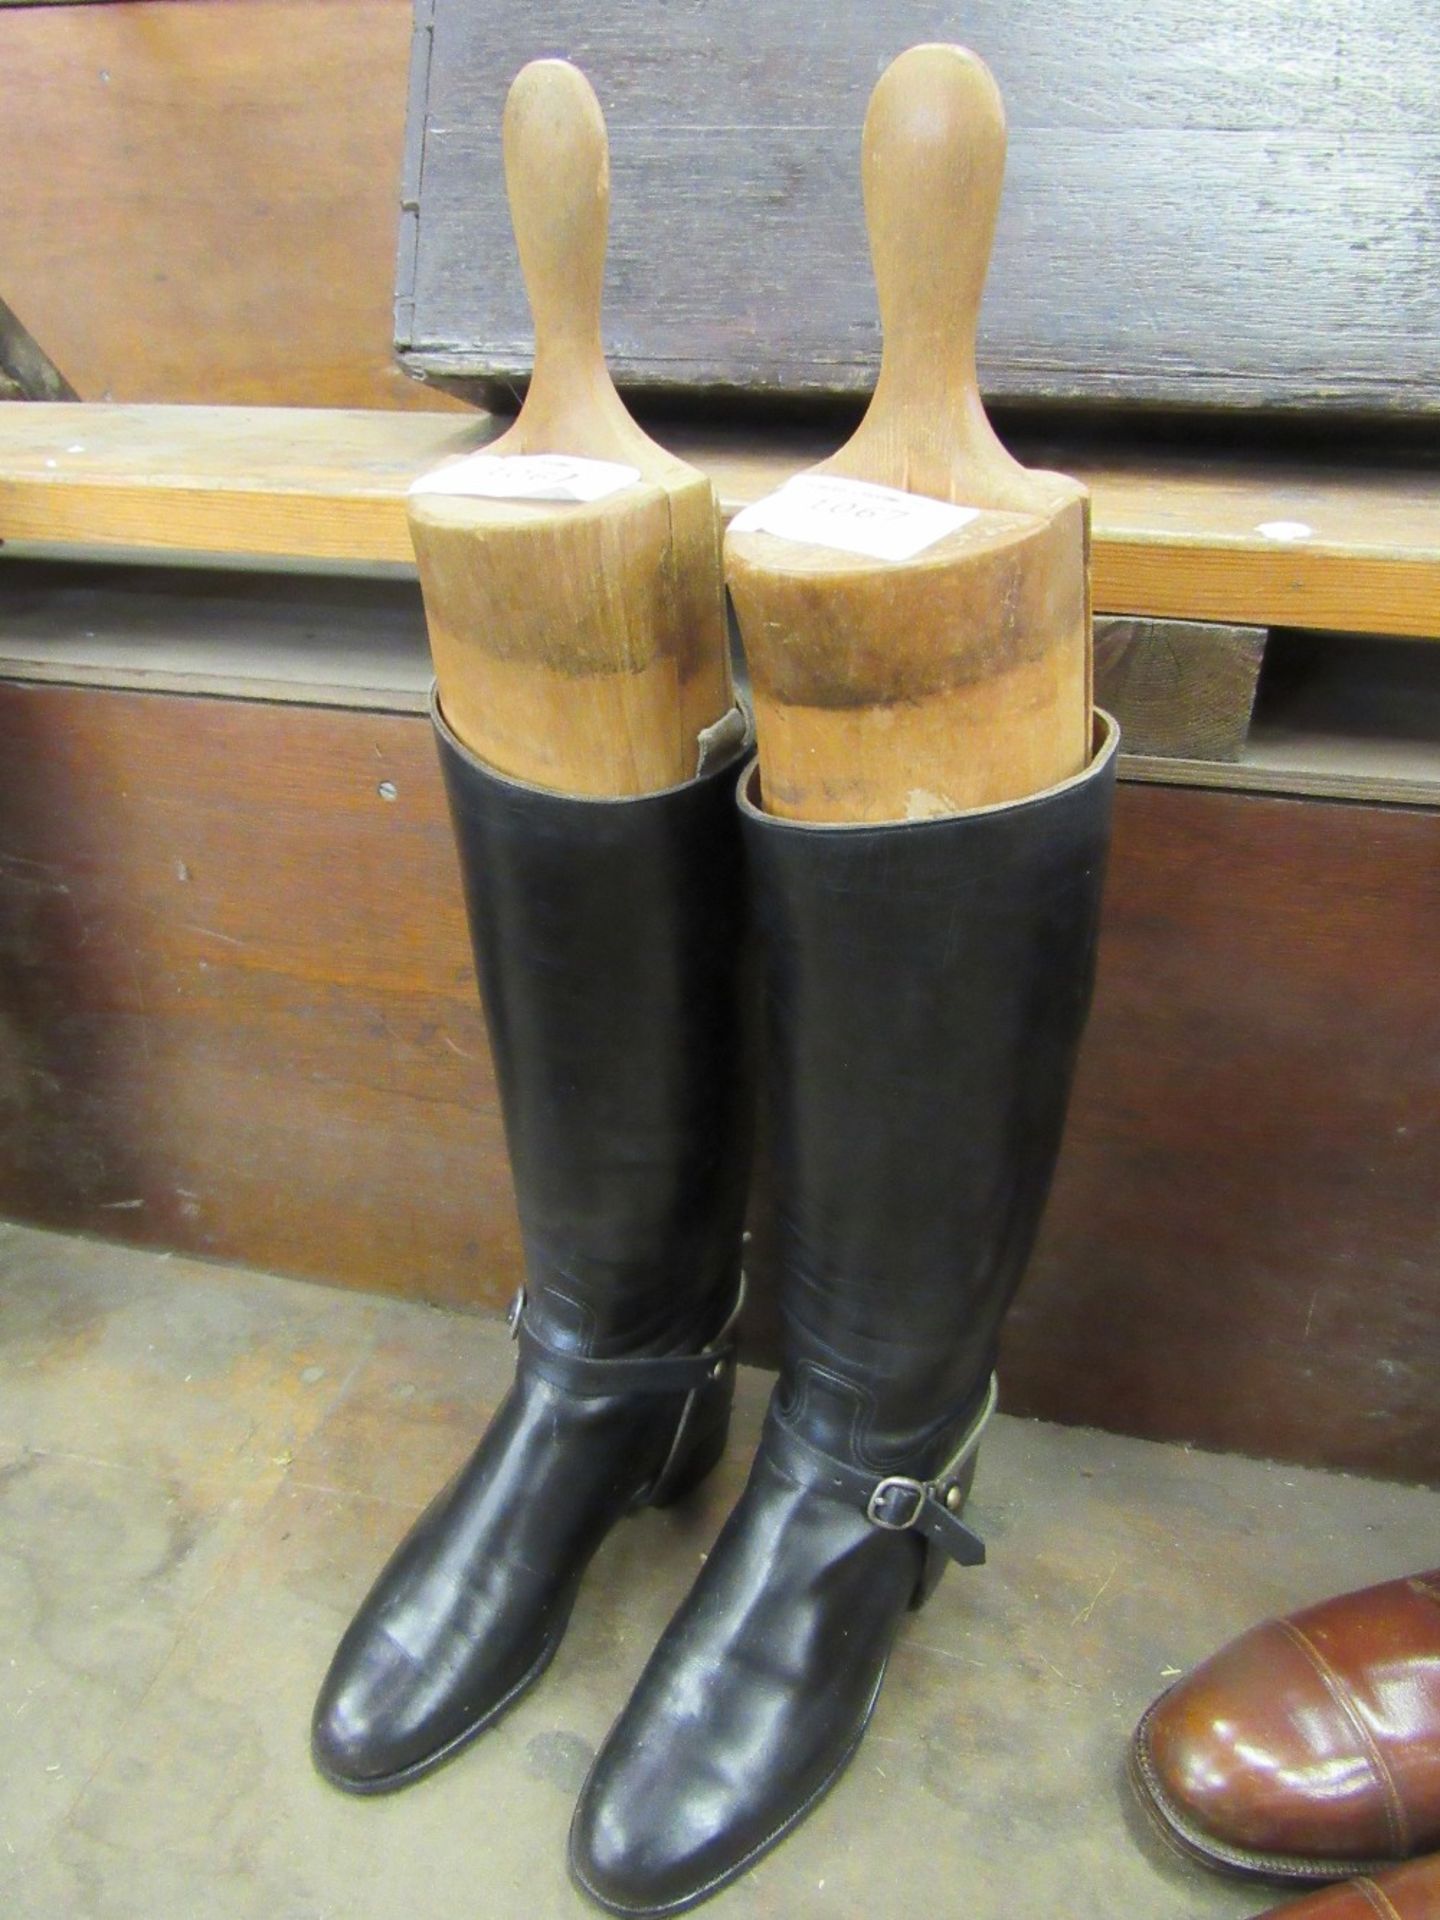 A pair of black riding boots with trees